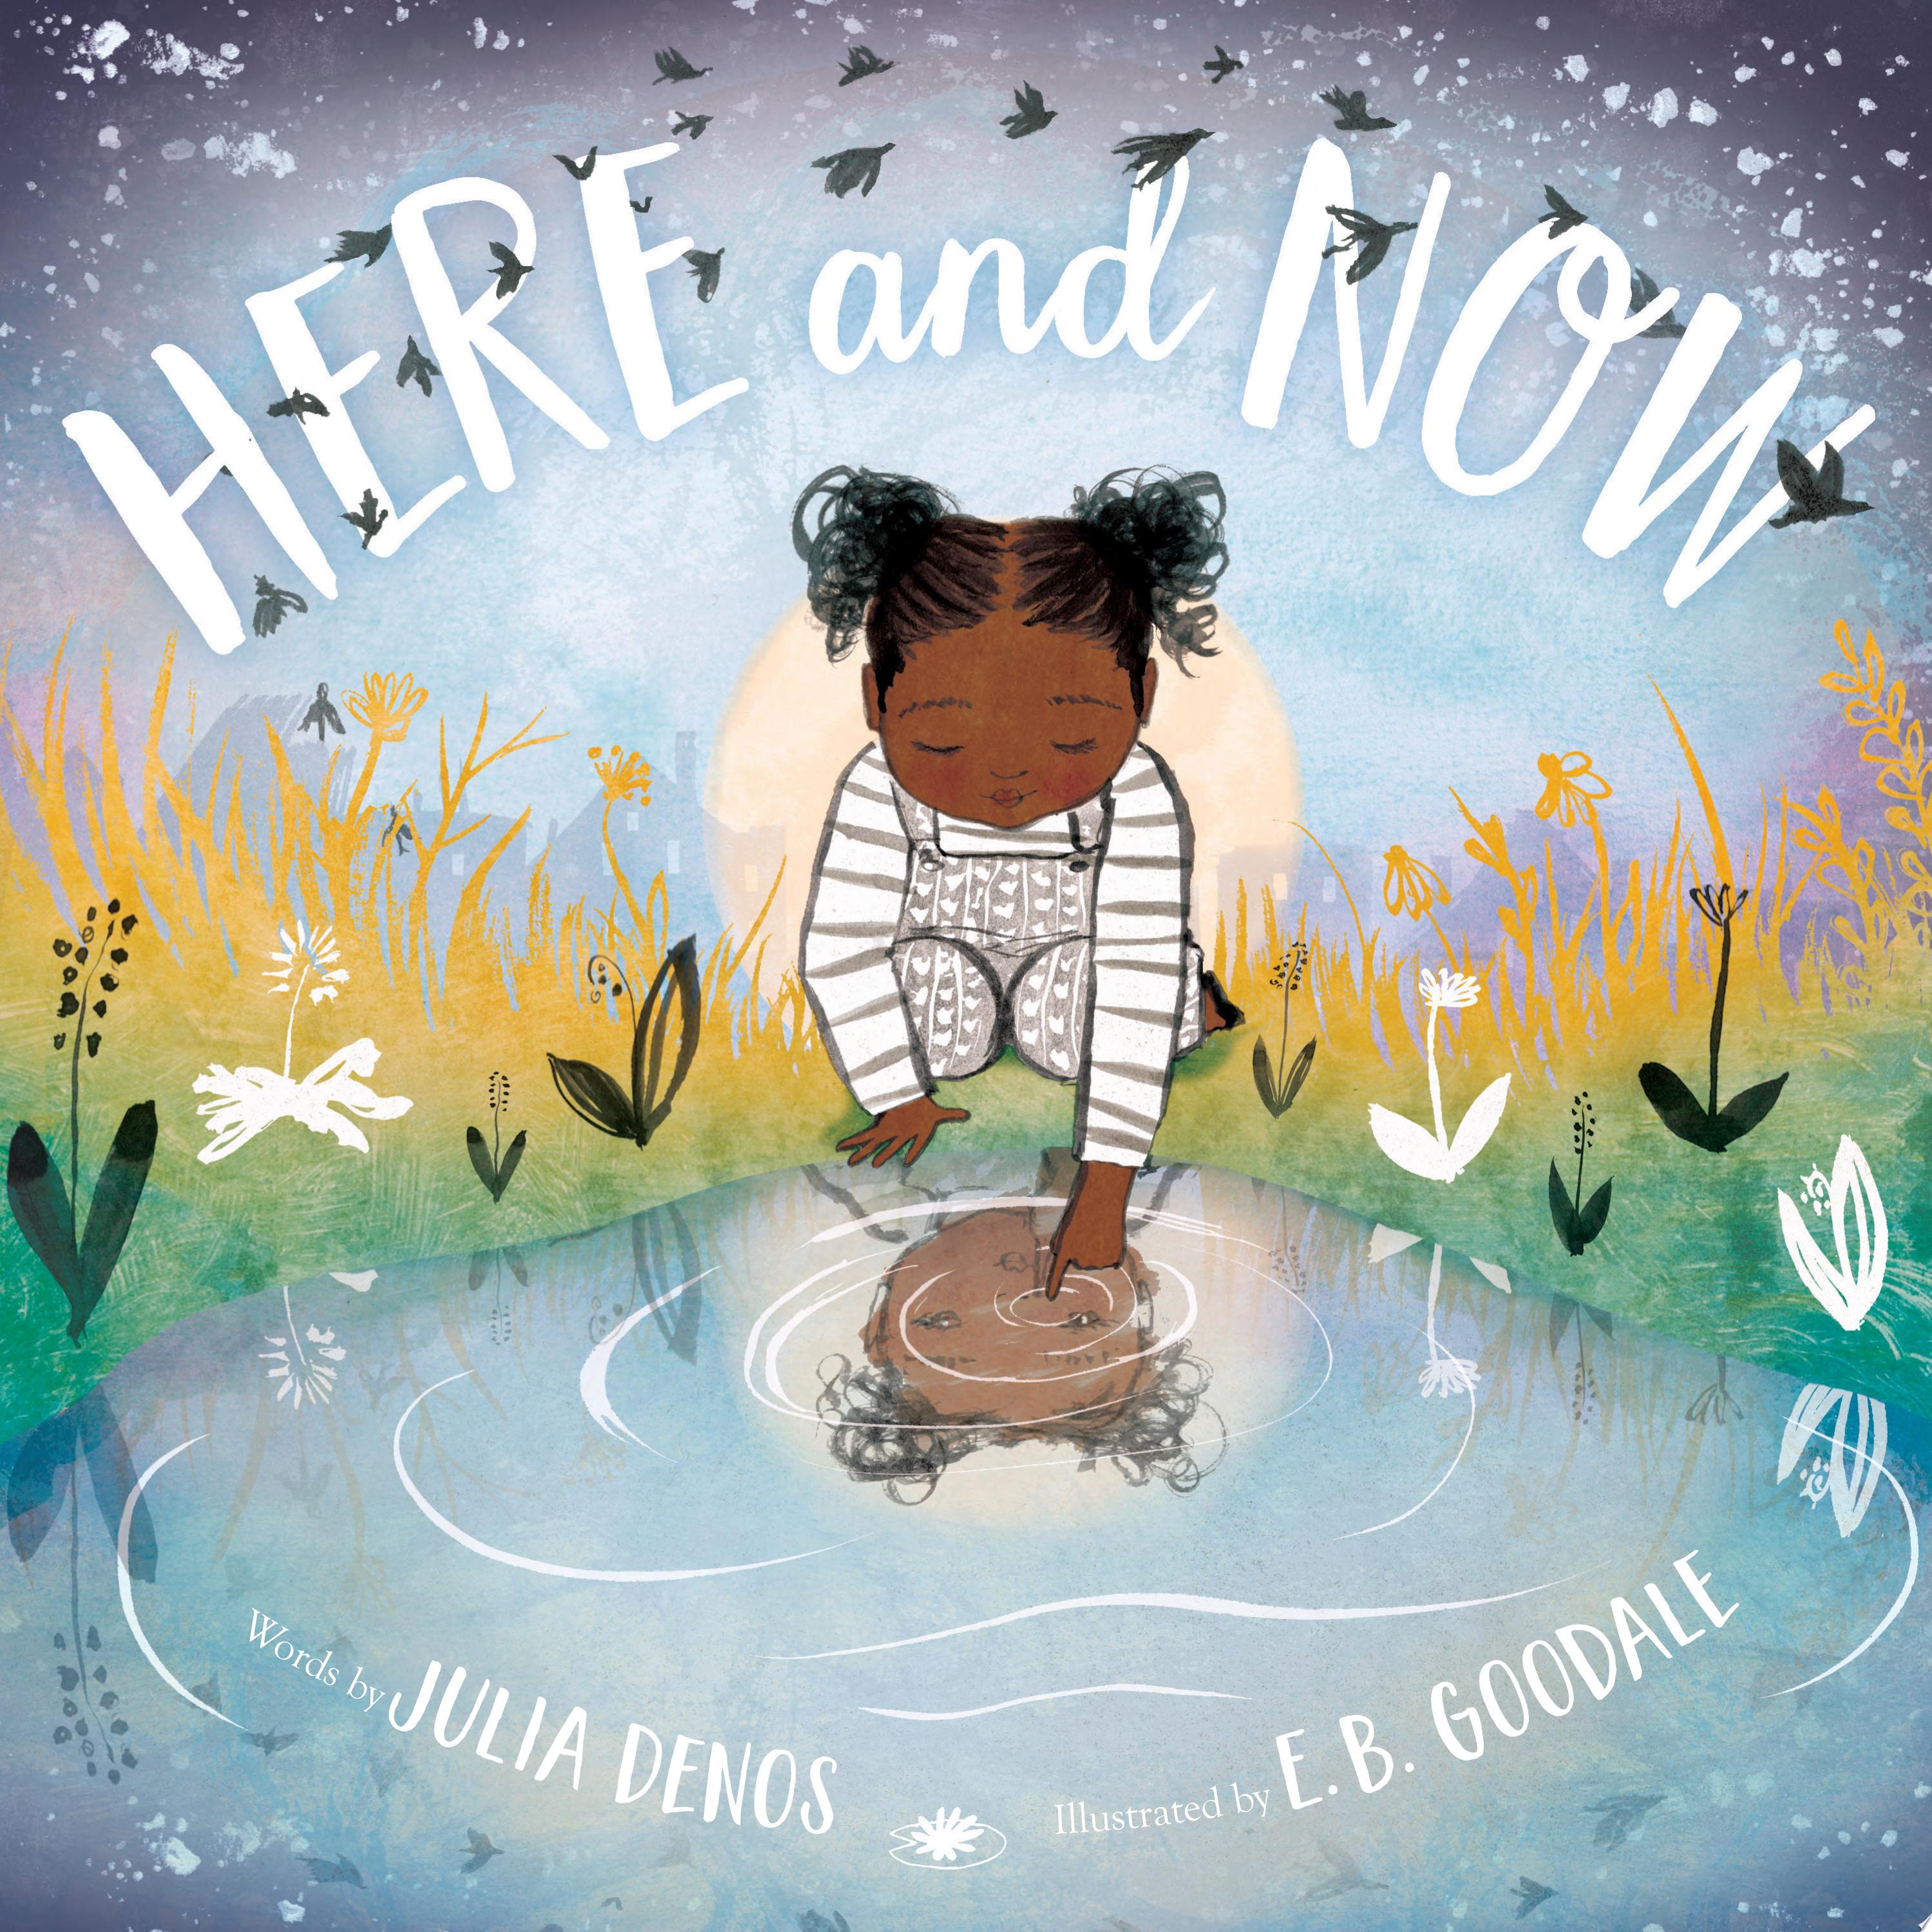 Image for "Here and Now"